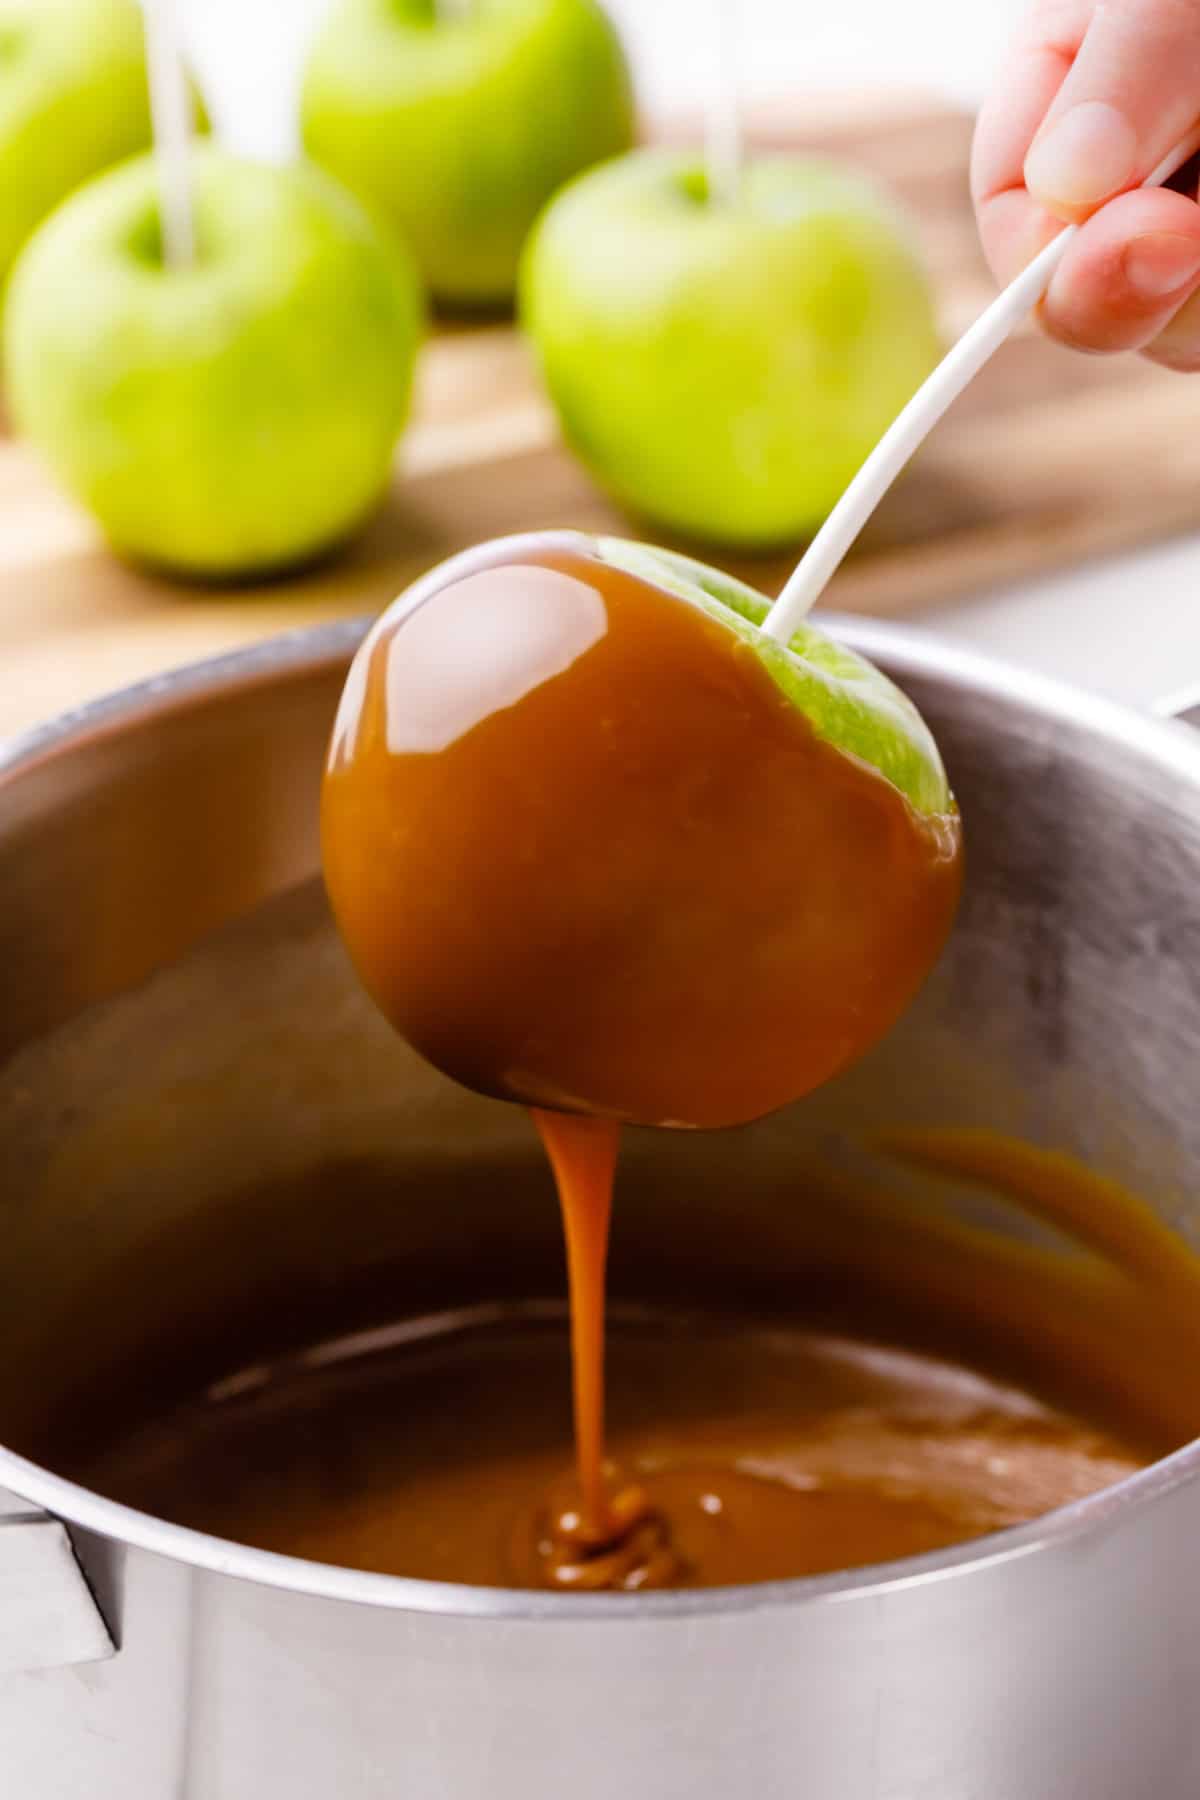 granny smith apple on a stick dipping into caramel sauce